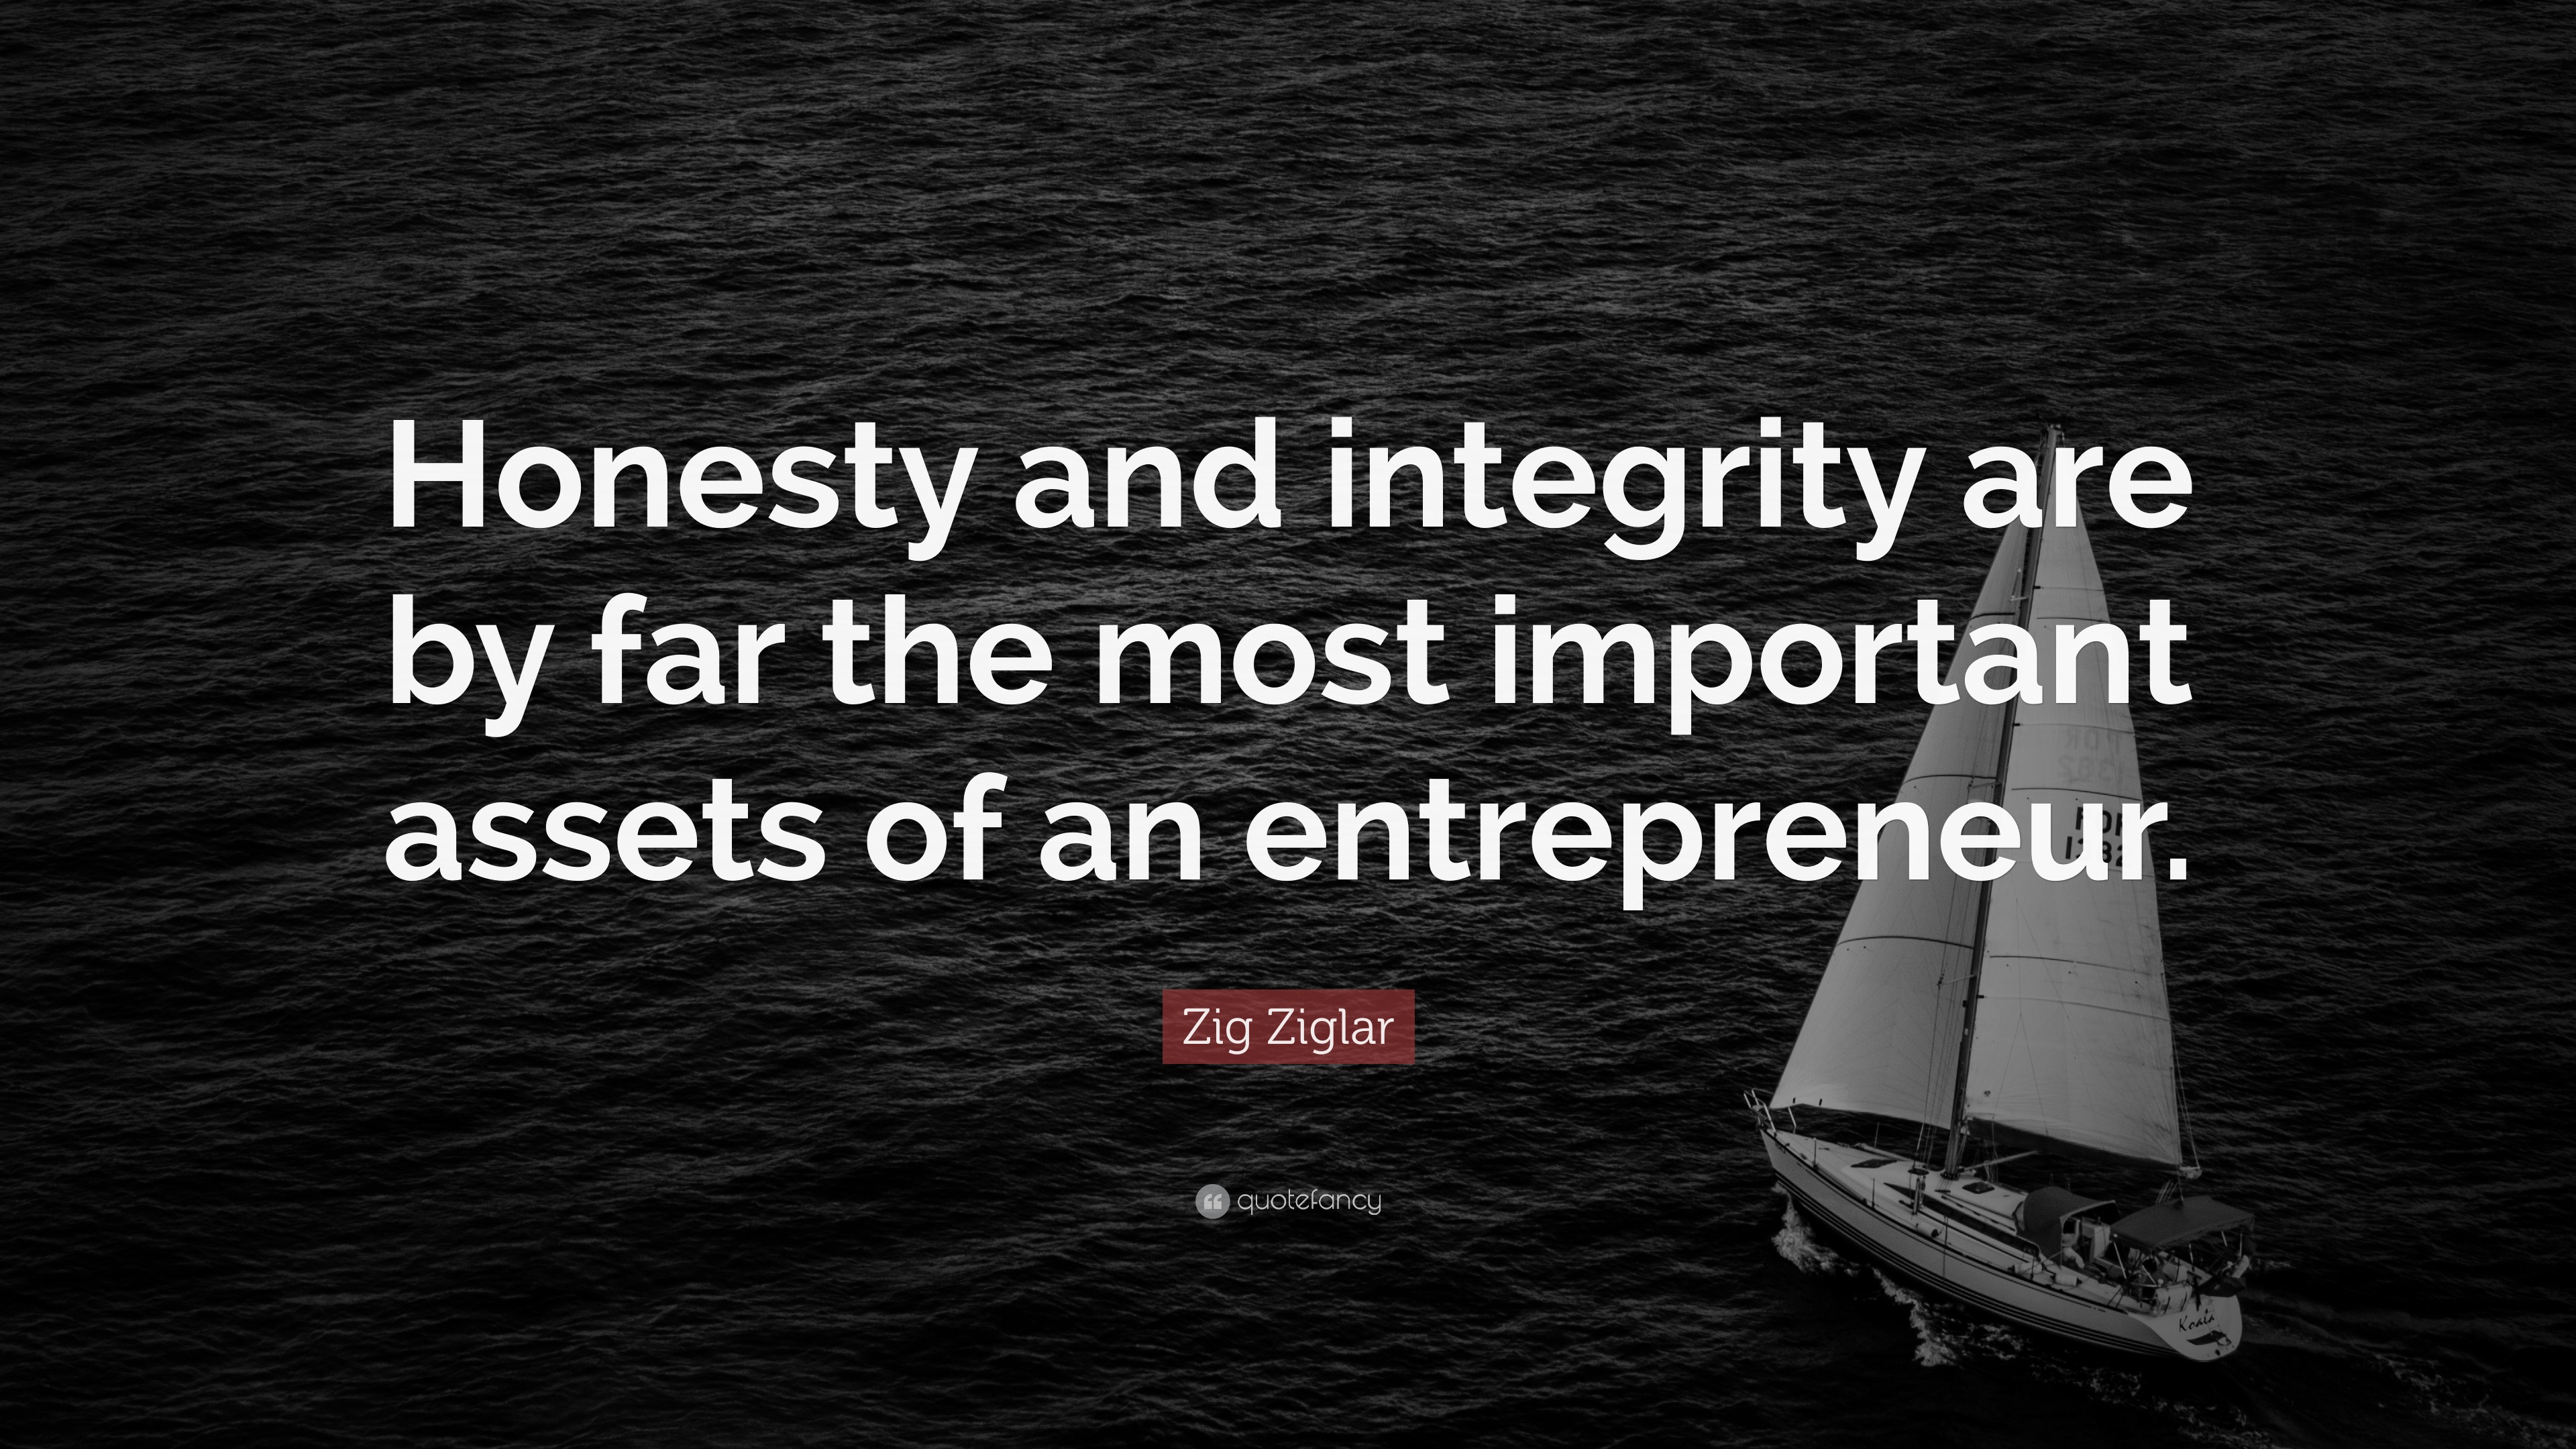 Integrity Quotes (60 wallpapers) - Quotefancy